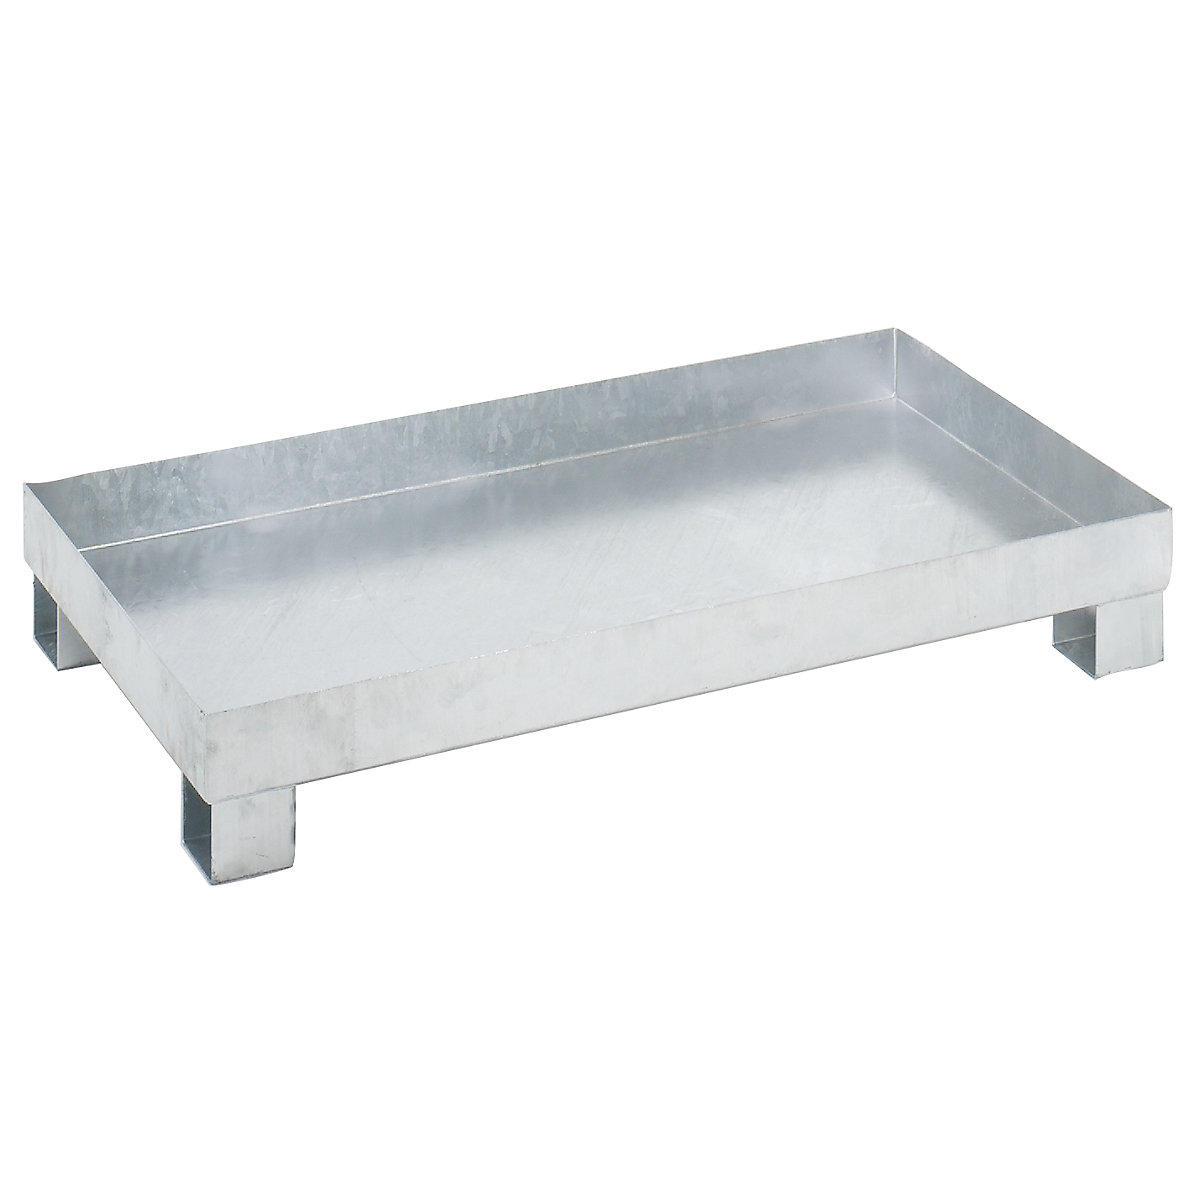 Sump tray for 60 l – eurokraft basic, LxWxH 800 x 1300 x 205 mm, with certification, hot dip galvanised, without grate-5